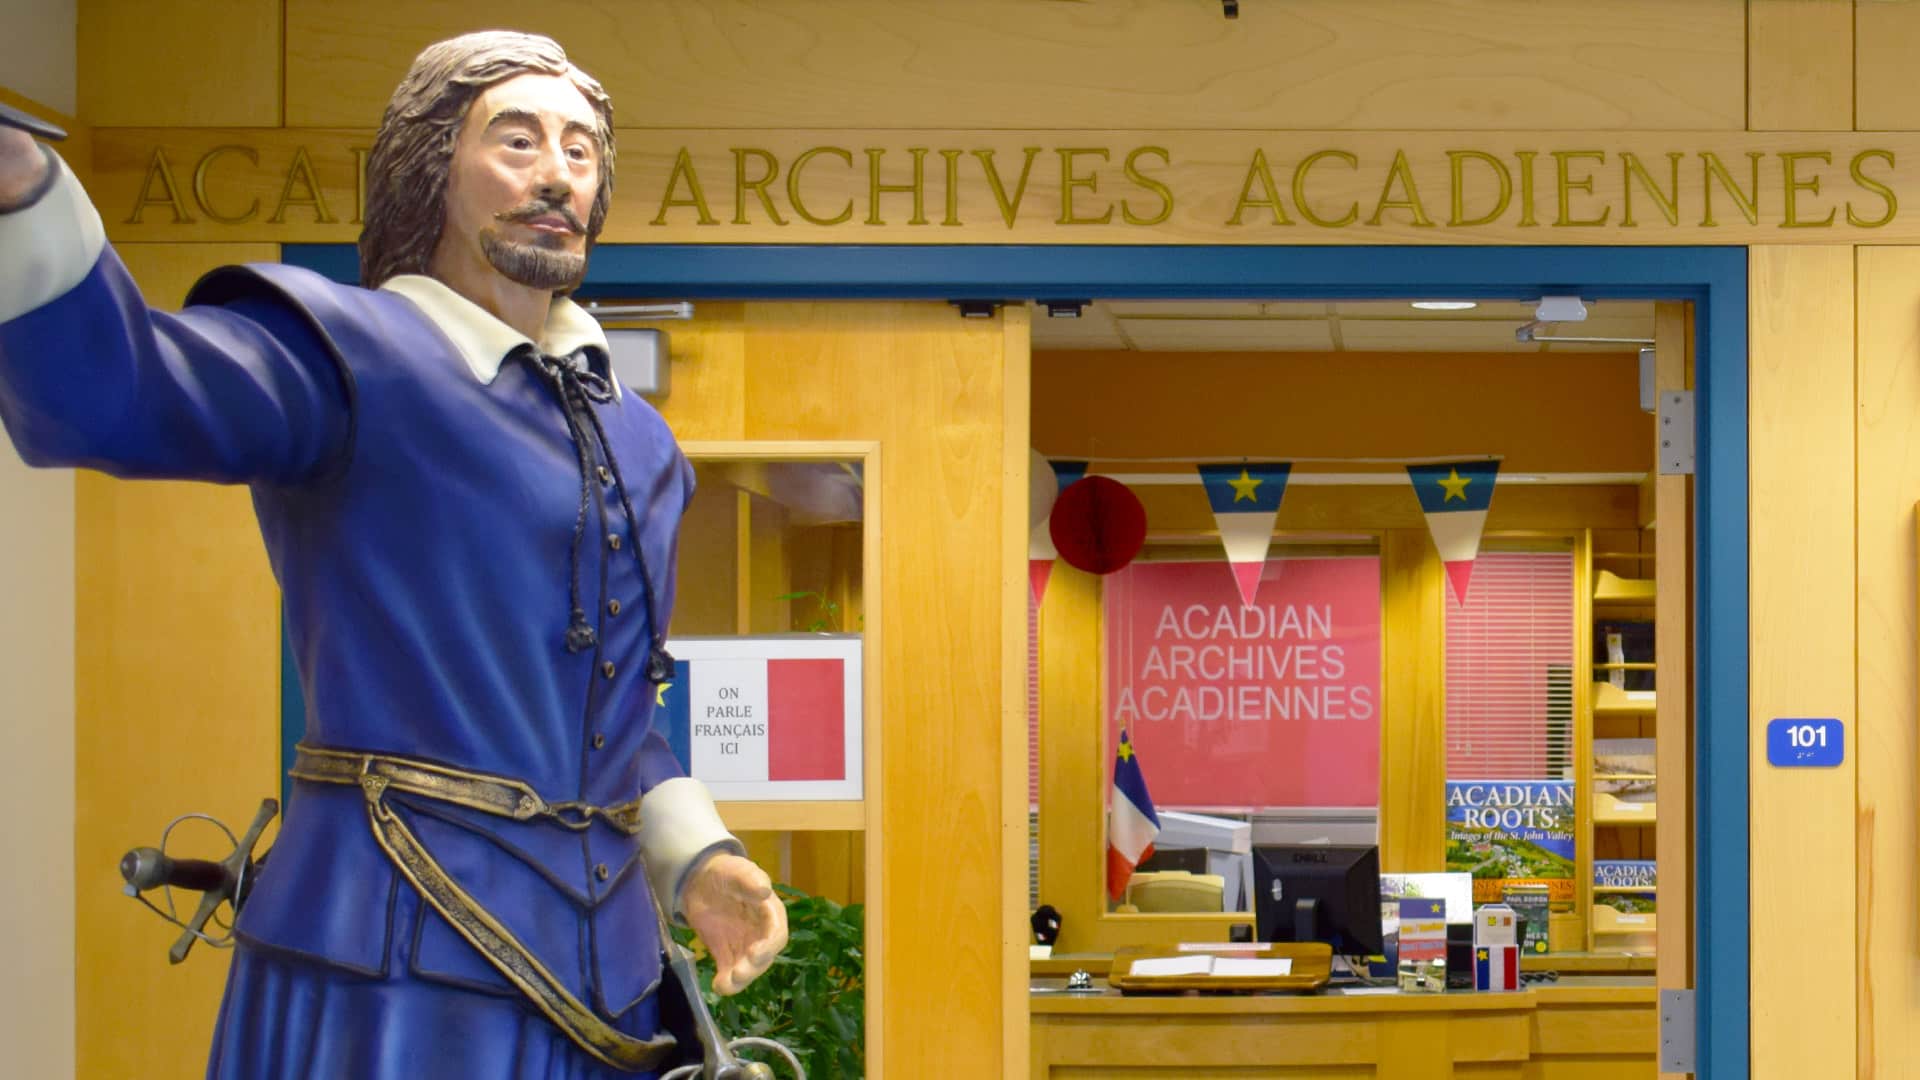 entrance to the Acadian Archives with a statue of Samuel de Champlain in the foreground